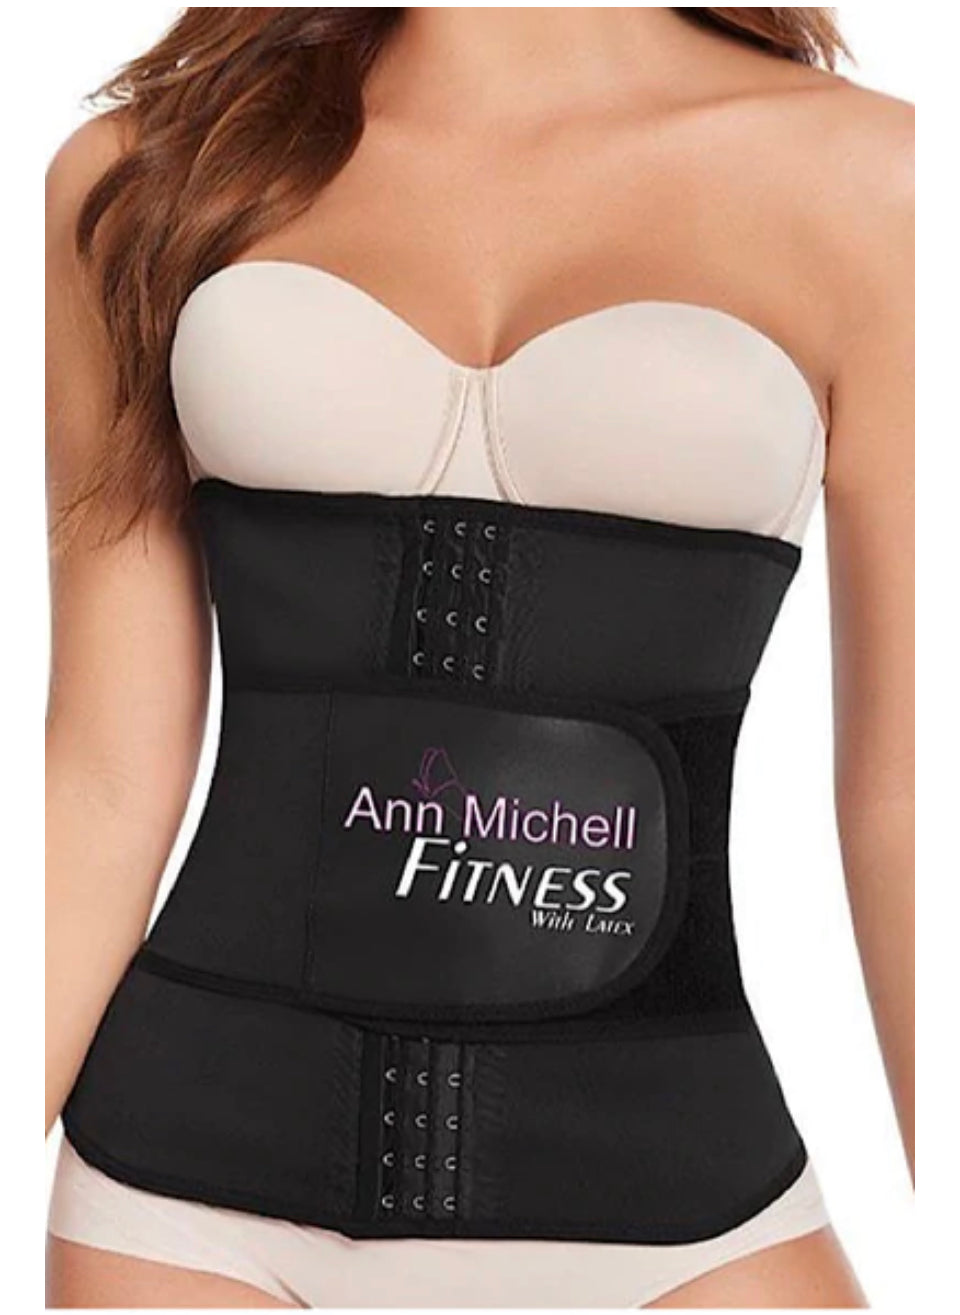 AC4024 #1 Best selling Double Compression Fitness Latex Waist Trainer